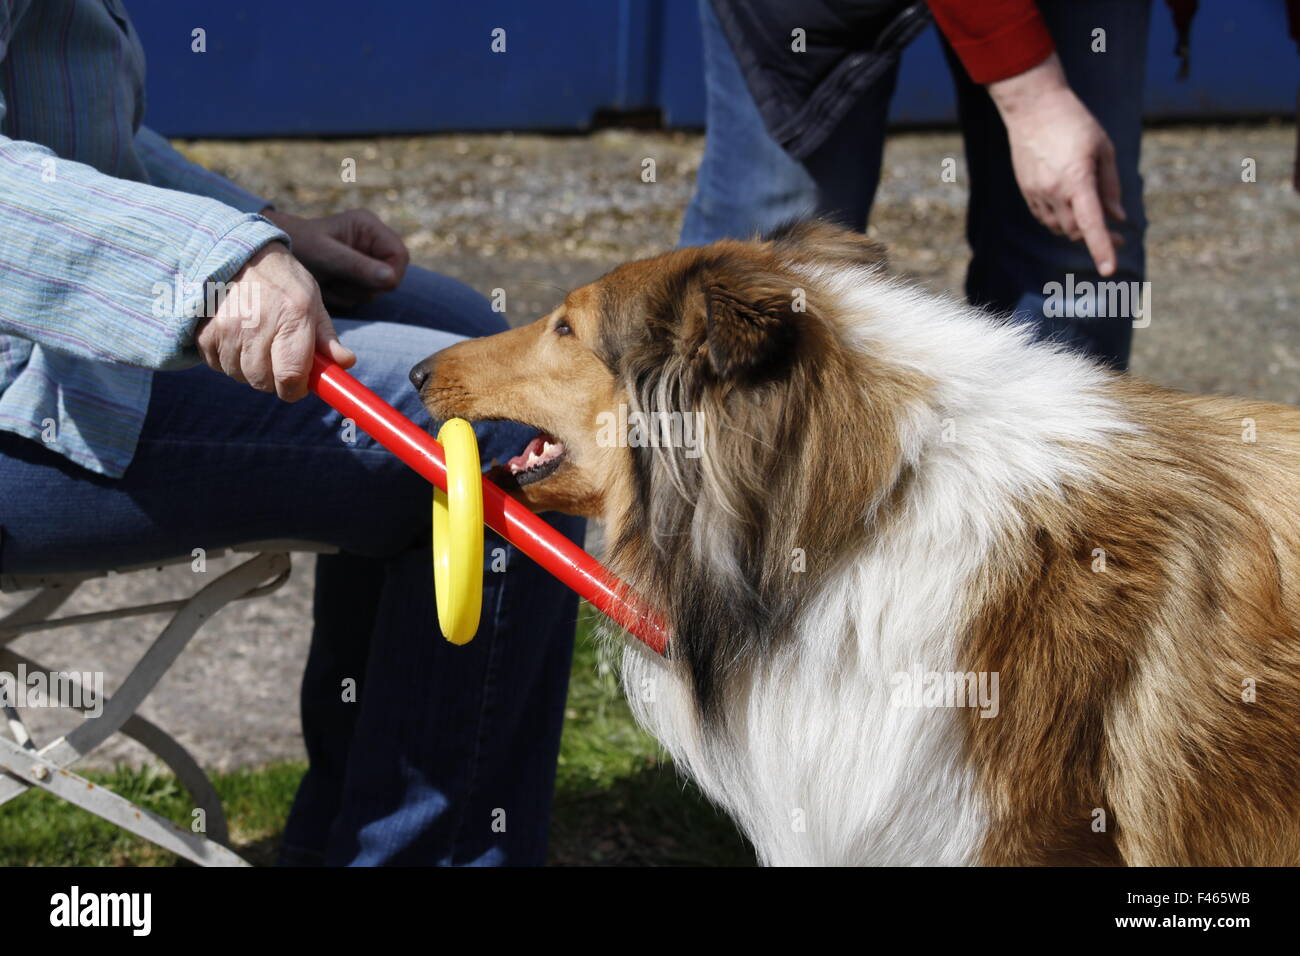 animal-assissted therapy Stock Photo